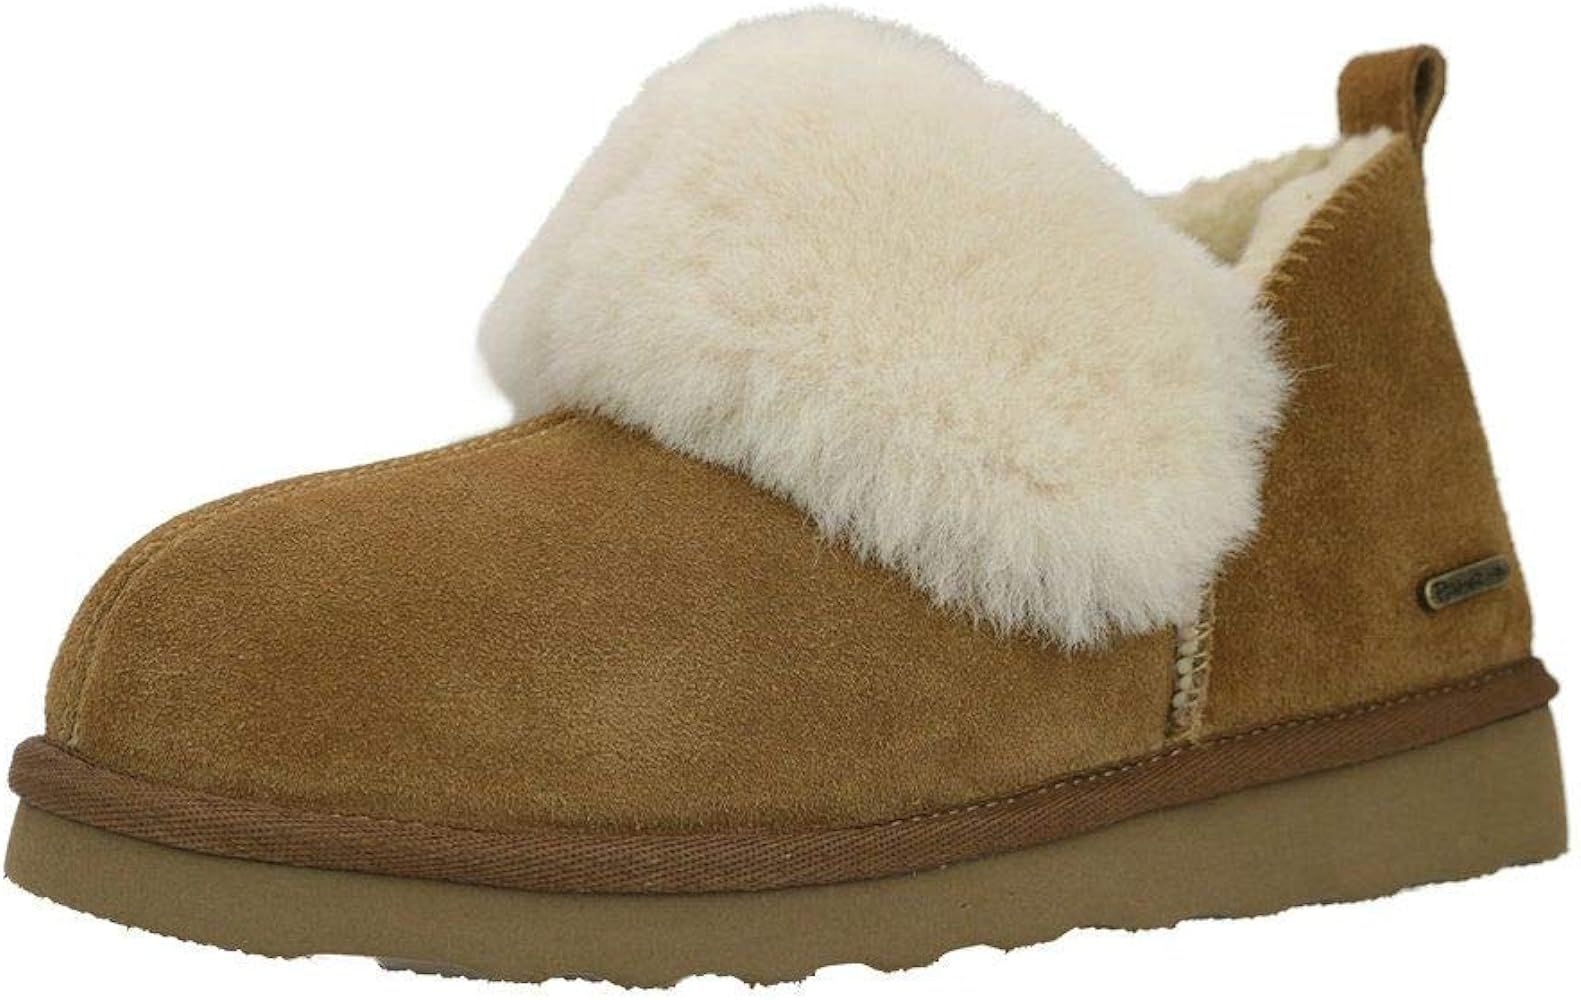 PAMIR Women's Genuine Suede Shearling Ankle Moccasin Booties Slippers Boots Memory Foam Indoor Outdo | Amazon (US)